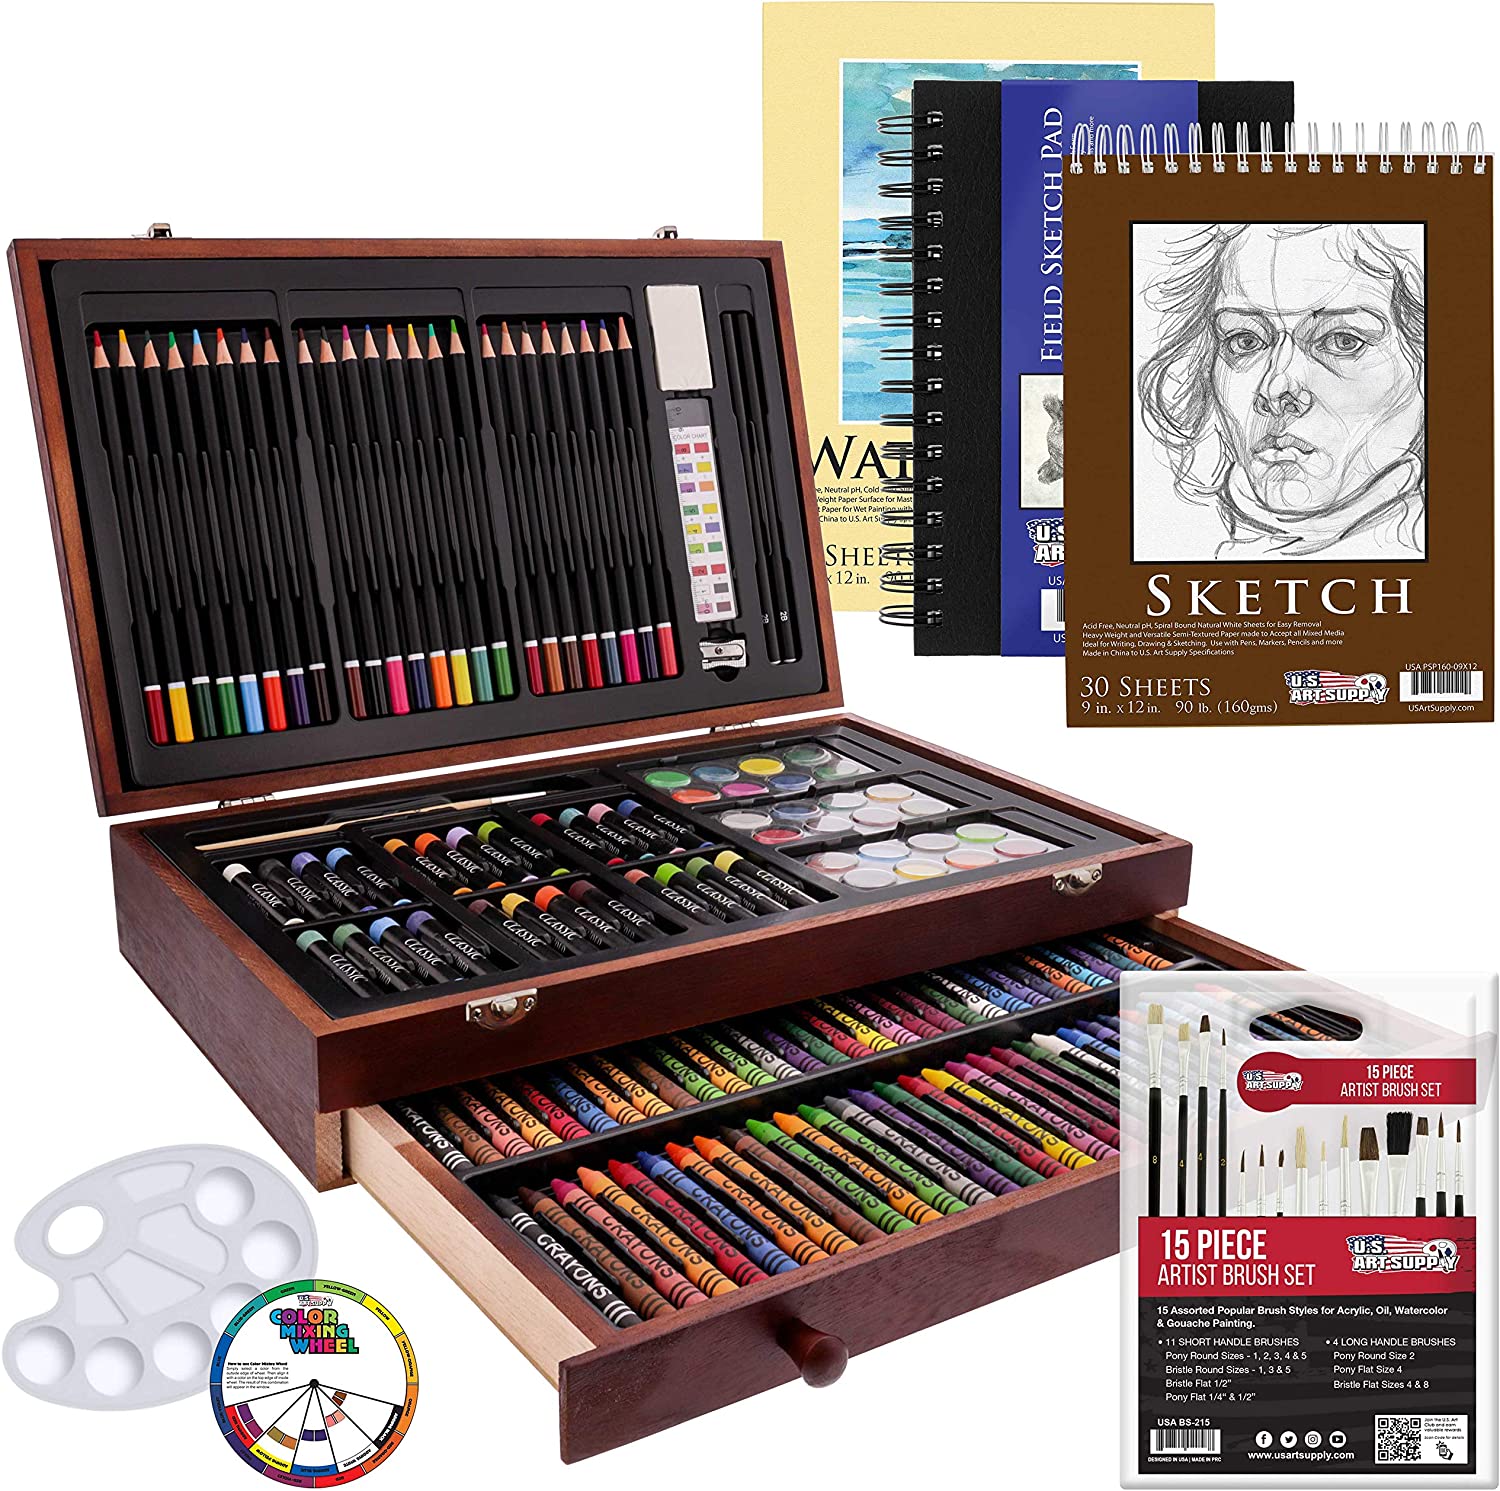 Art Supplies iBayam 150-Pack Deluxe Wooden Art Set Crafts Drawing Painting  Ki